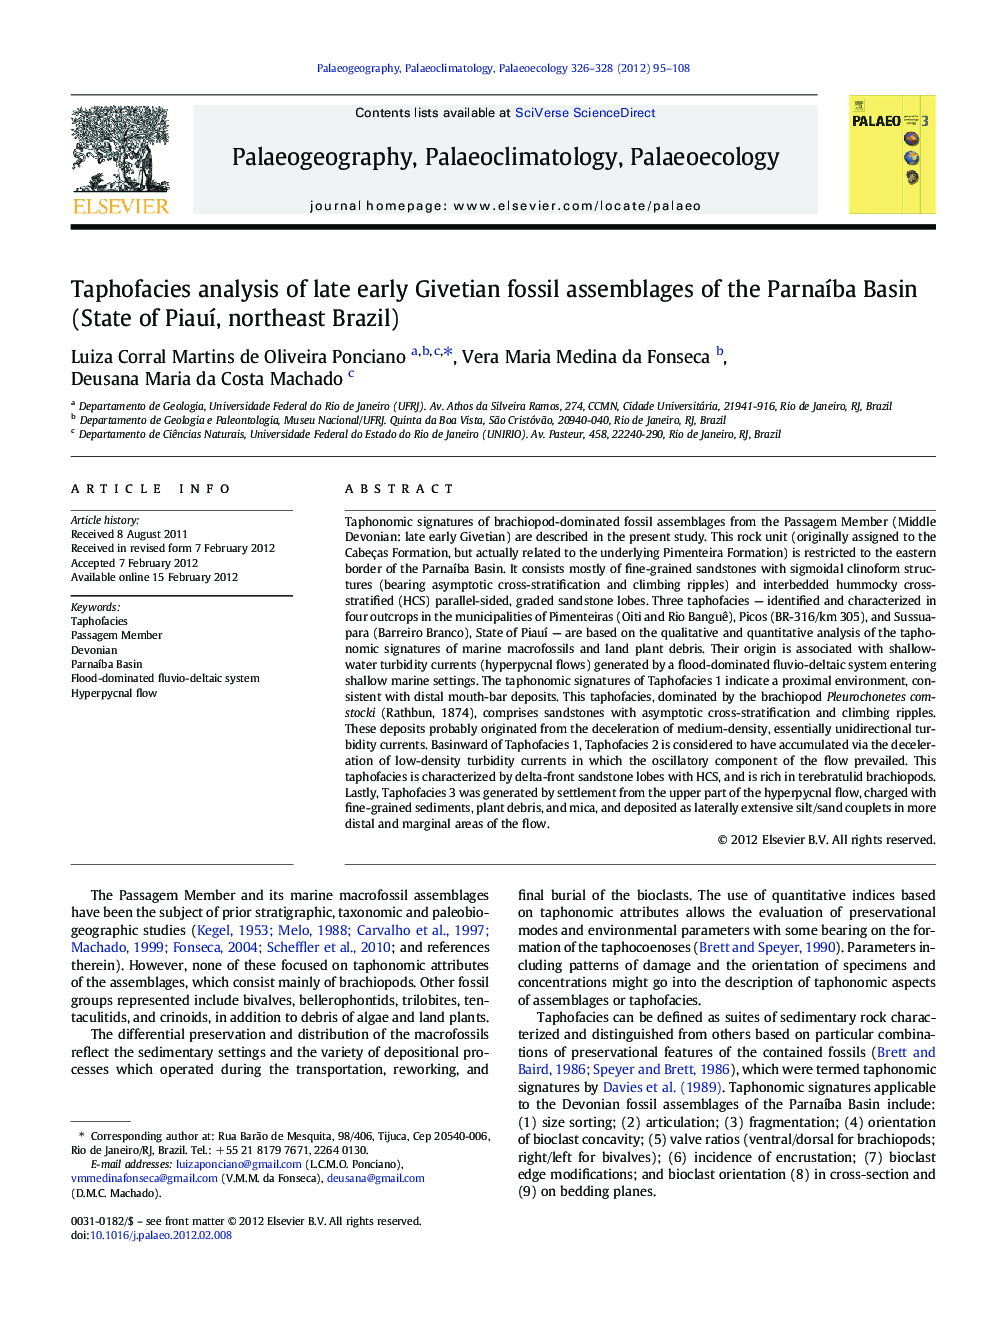 Taphofacies analysis of late early Givetian fossil assemblages of the Parnaíba Basin (State of Piauí, northeast Brazil)